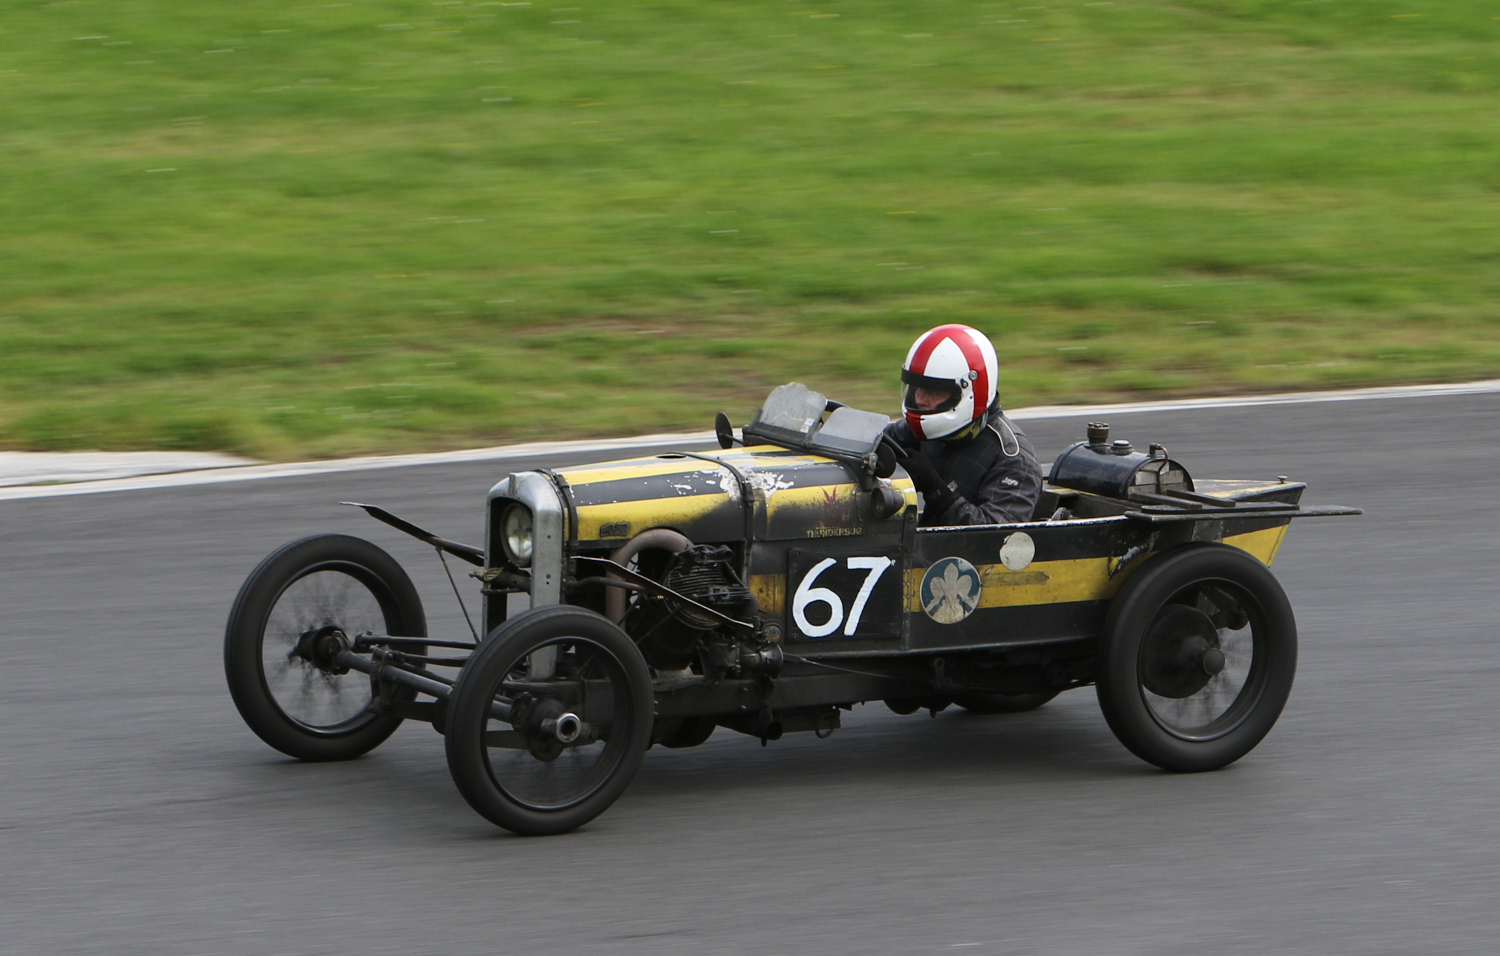 MARK WALKER DROVE THE GN THUNDERBUG TWIN IN ENTERTAINING STYLE. Picasa